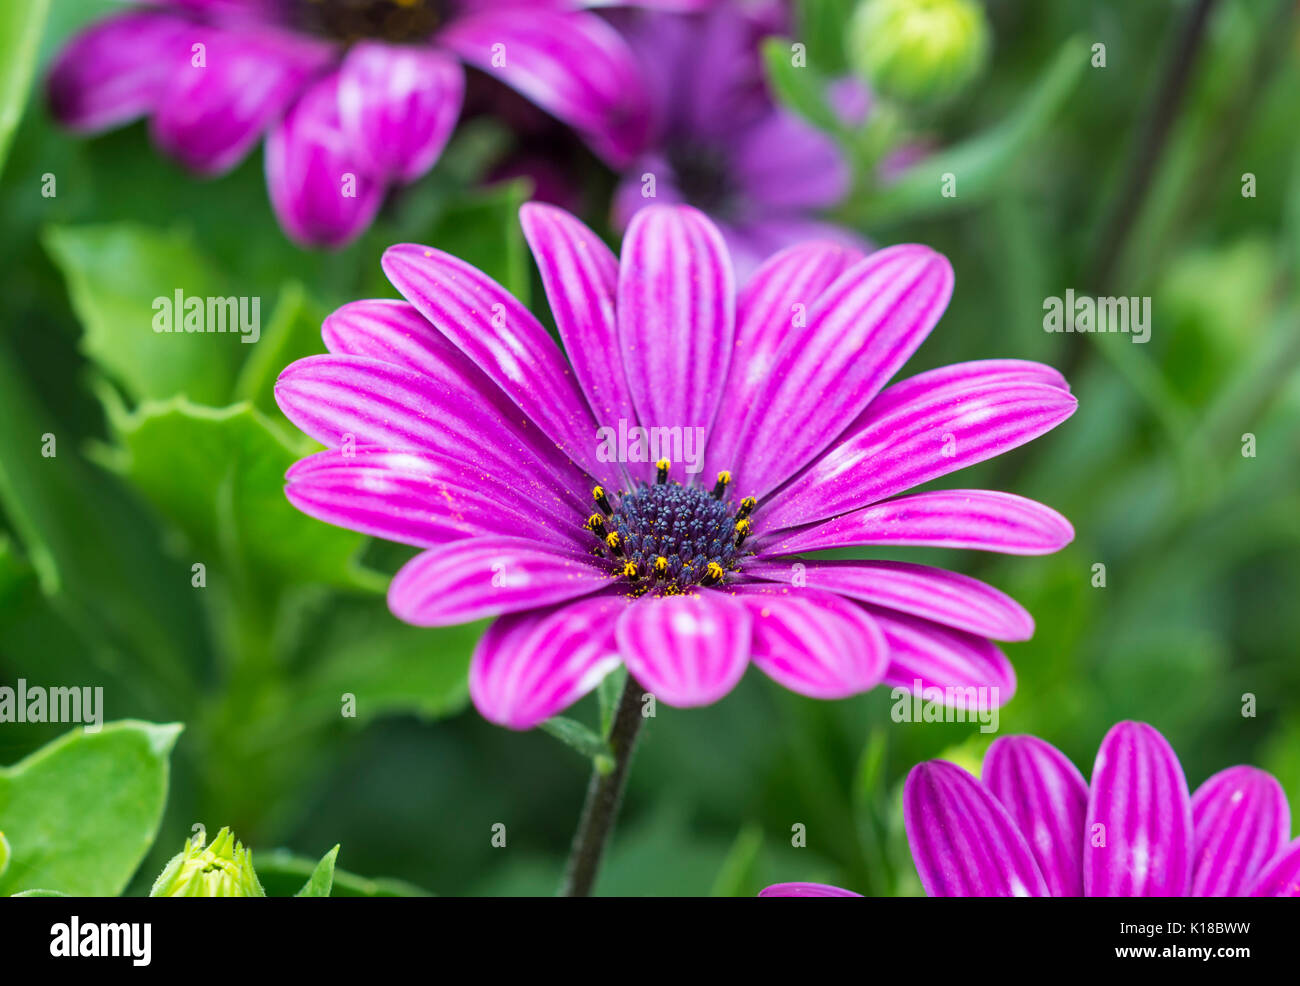 Osteospermum ecklonis, probably 'Astra purple', AKA African daisy growing in late Summer in an ornate flowerbed in West Sussex, England, UK. Stock Photo